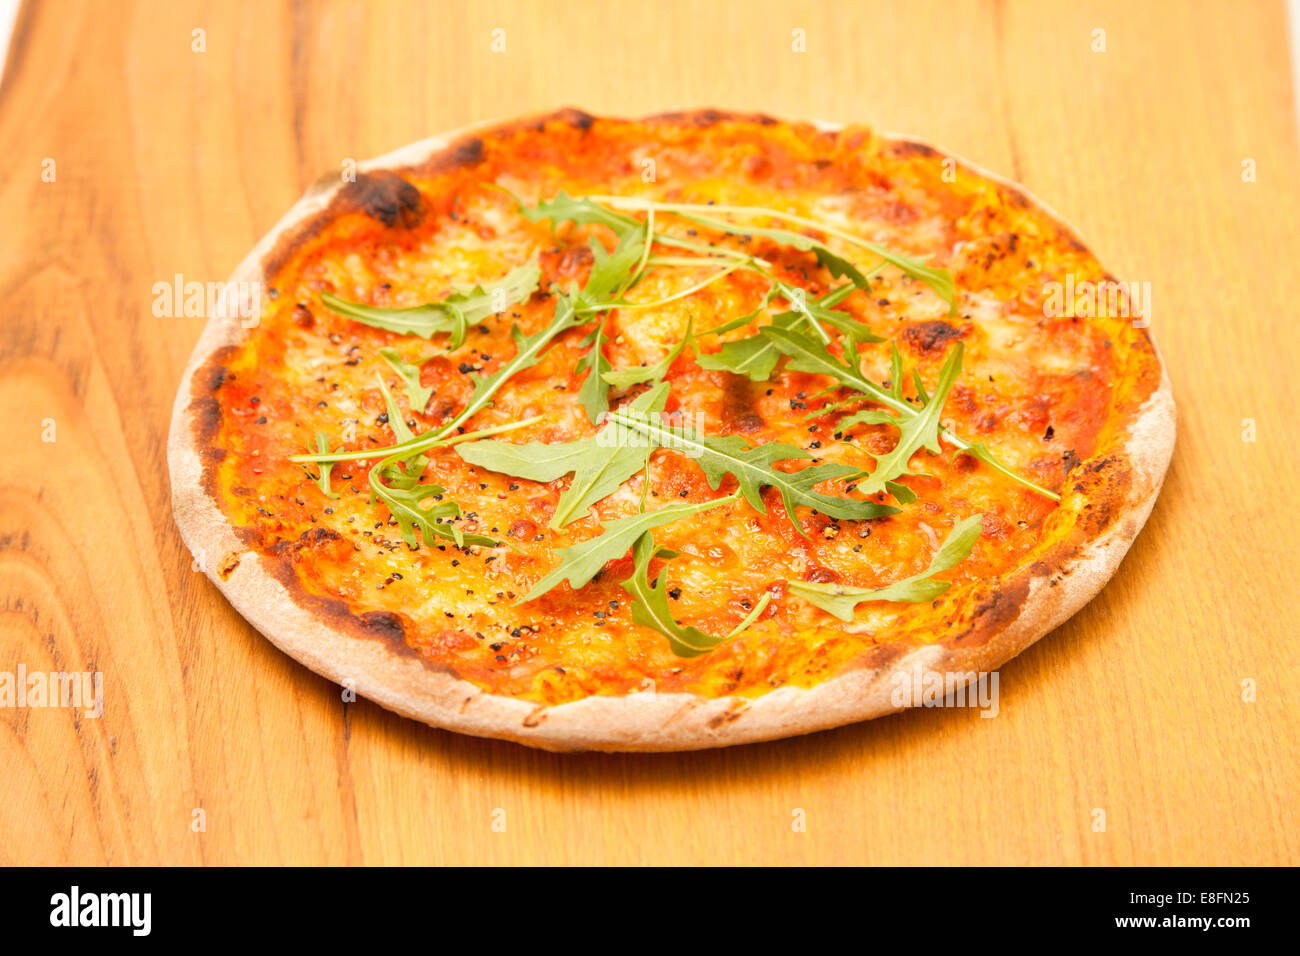 Cheese and tomato Pizza with chilli flakes and rocket on a wooden table Stock Photo